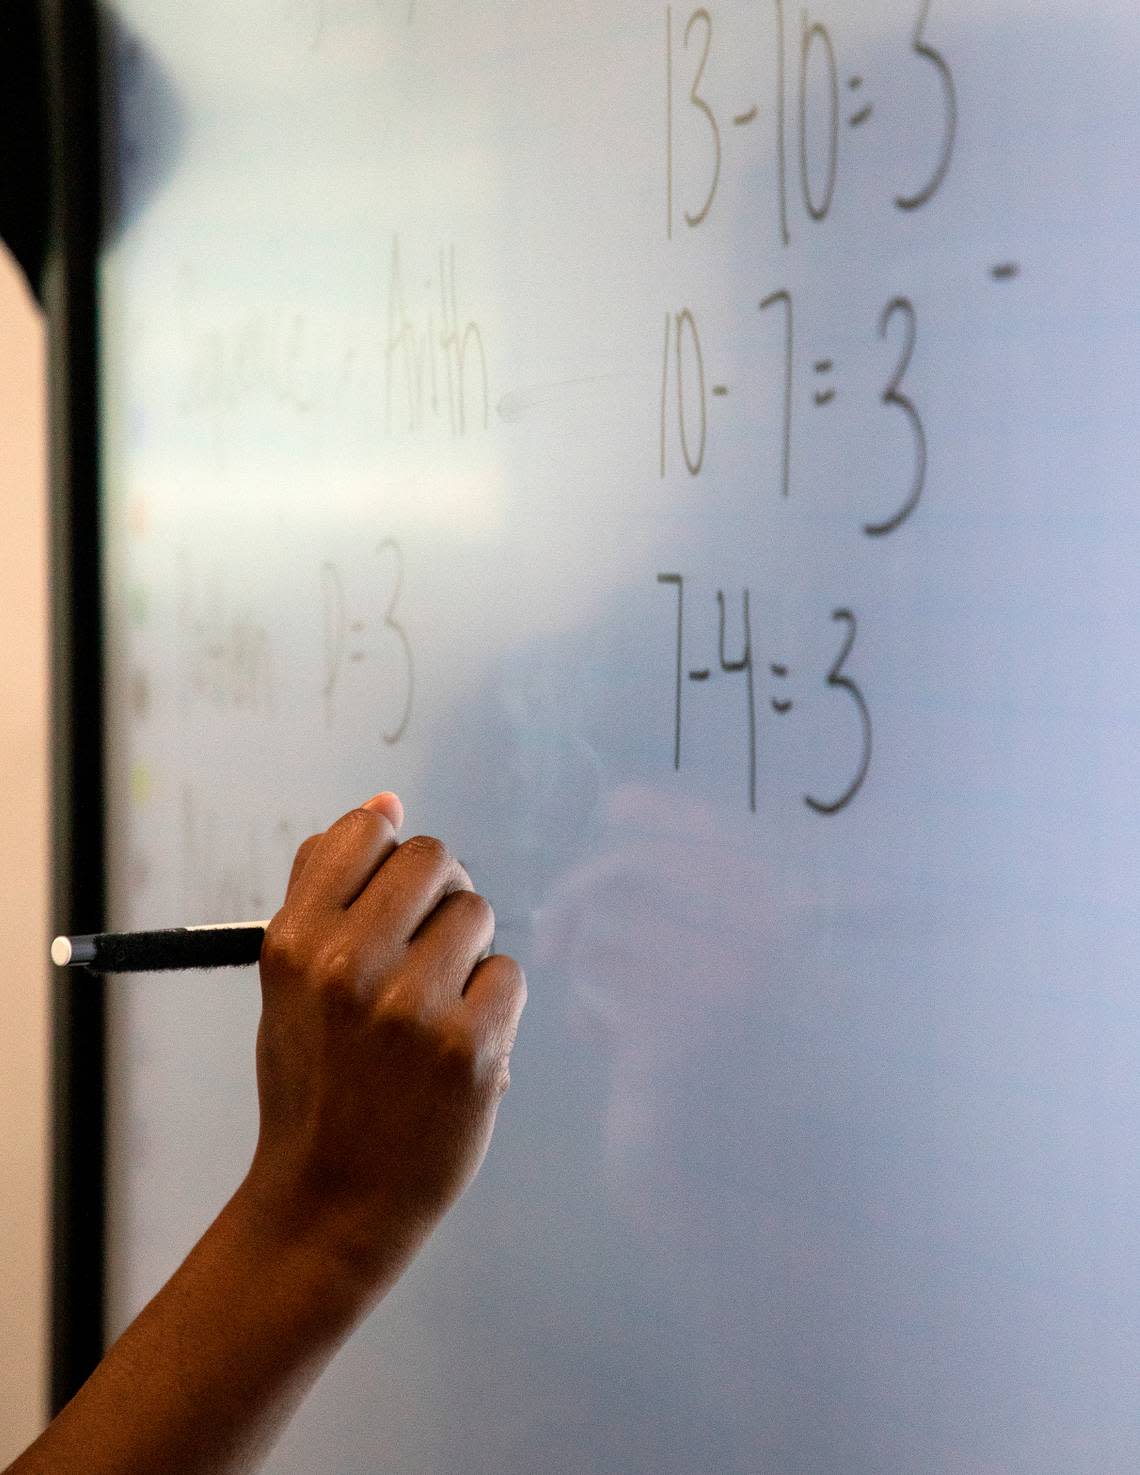 Knightdale High School teacher Alex Johnson explains examples of sequences during a math class on Tuesday, Sept. 5, 2023, in Knightdale, N.C. Kaitlin McKeown/kmckeown@newsobserver.com